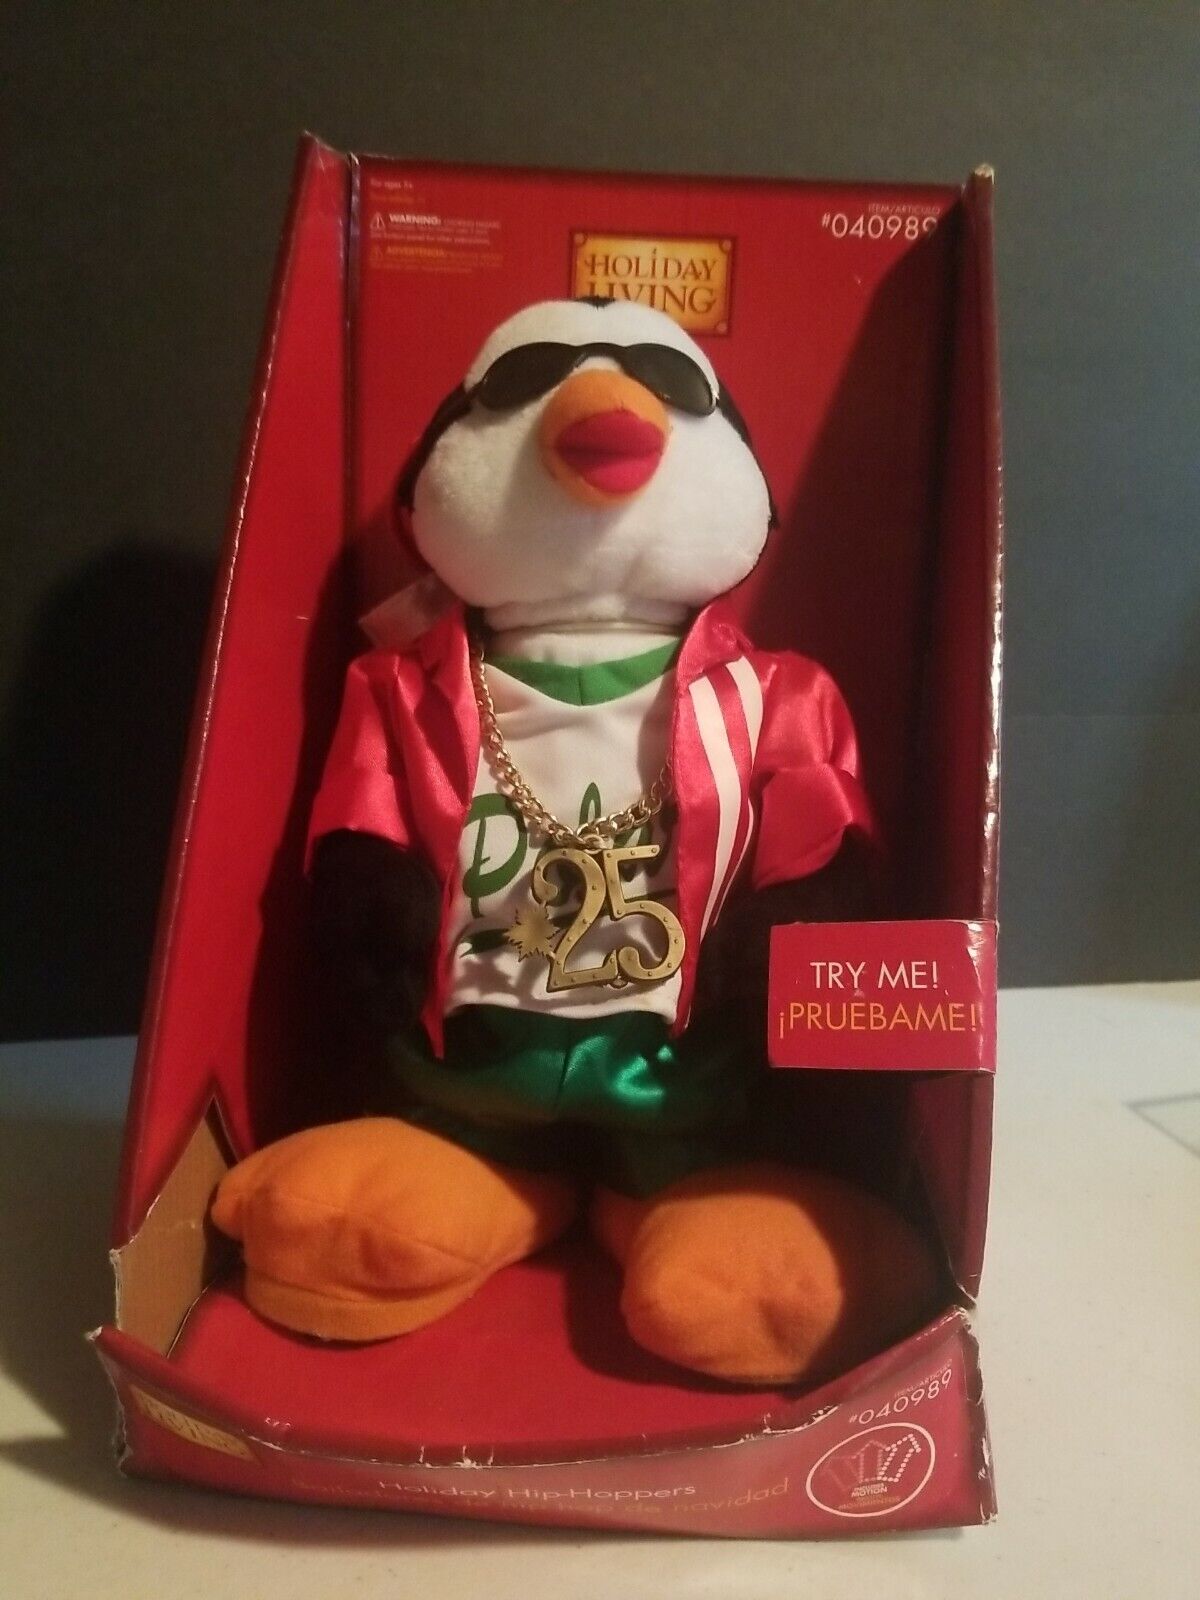 Ultra rare 2007 New Gemmy holiday living Hip Hoppers Penguin in da club 50 cent